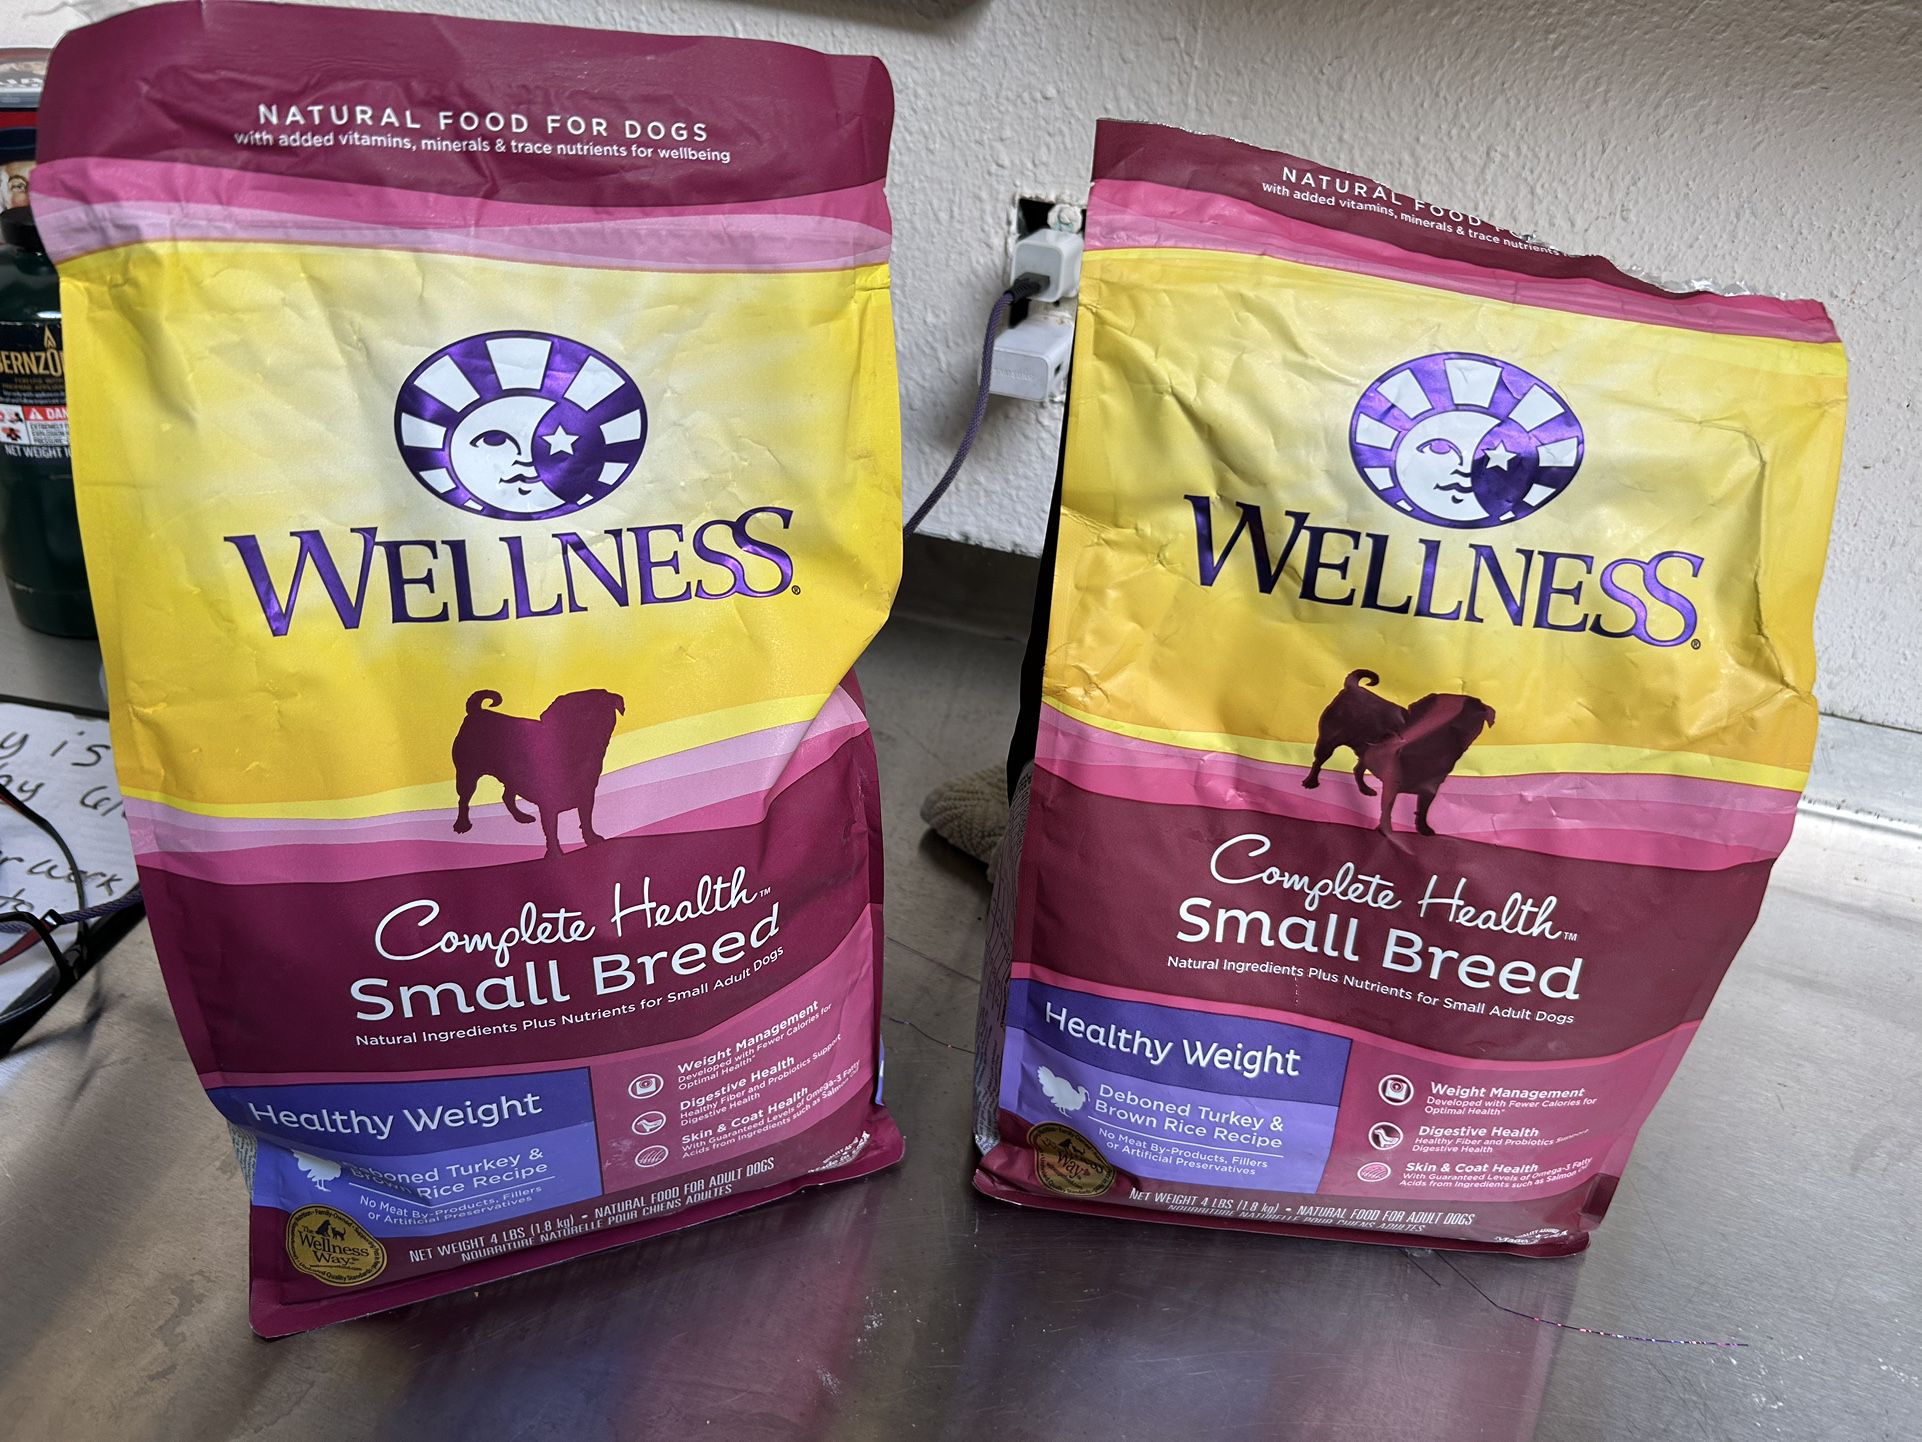 Unopened Brand New Bag Of Wellness Small Dog Food And One Bag Half Gone 